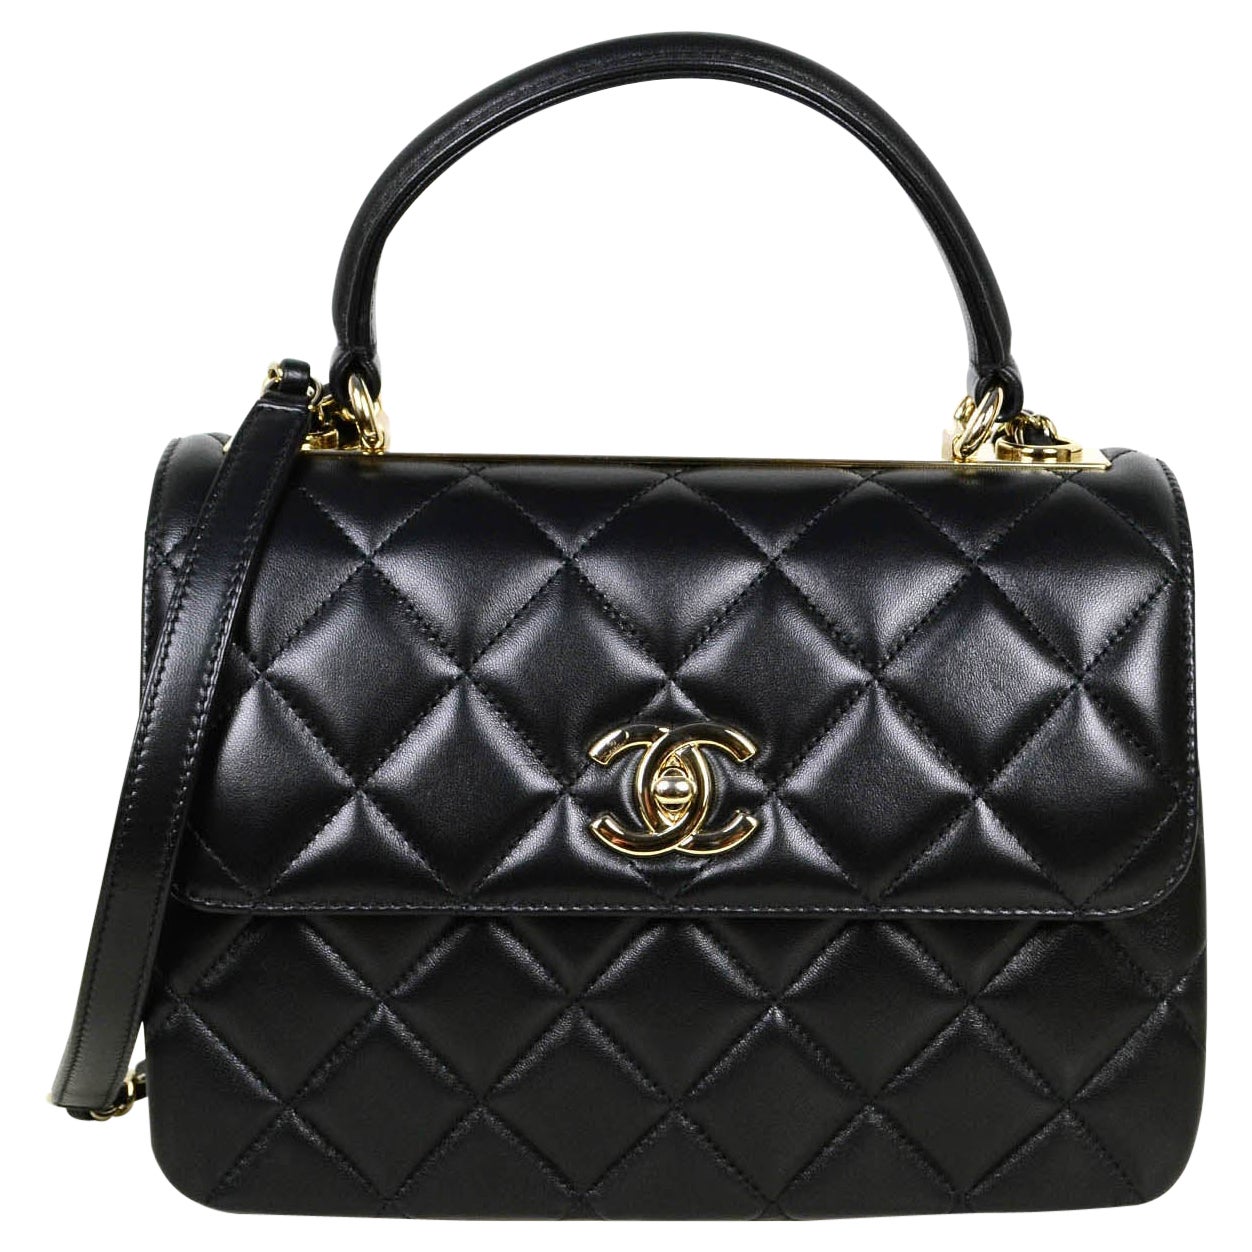 Chanel 2021 Black Lambskin Quilted Small Trendy CC Dual Handle